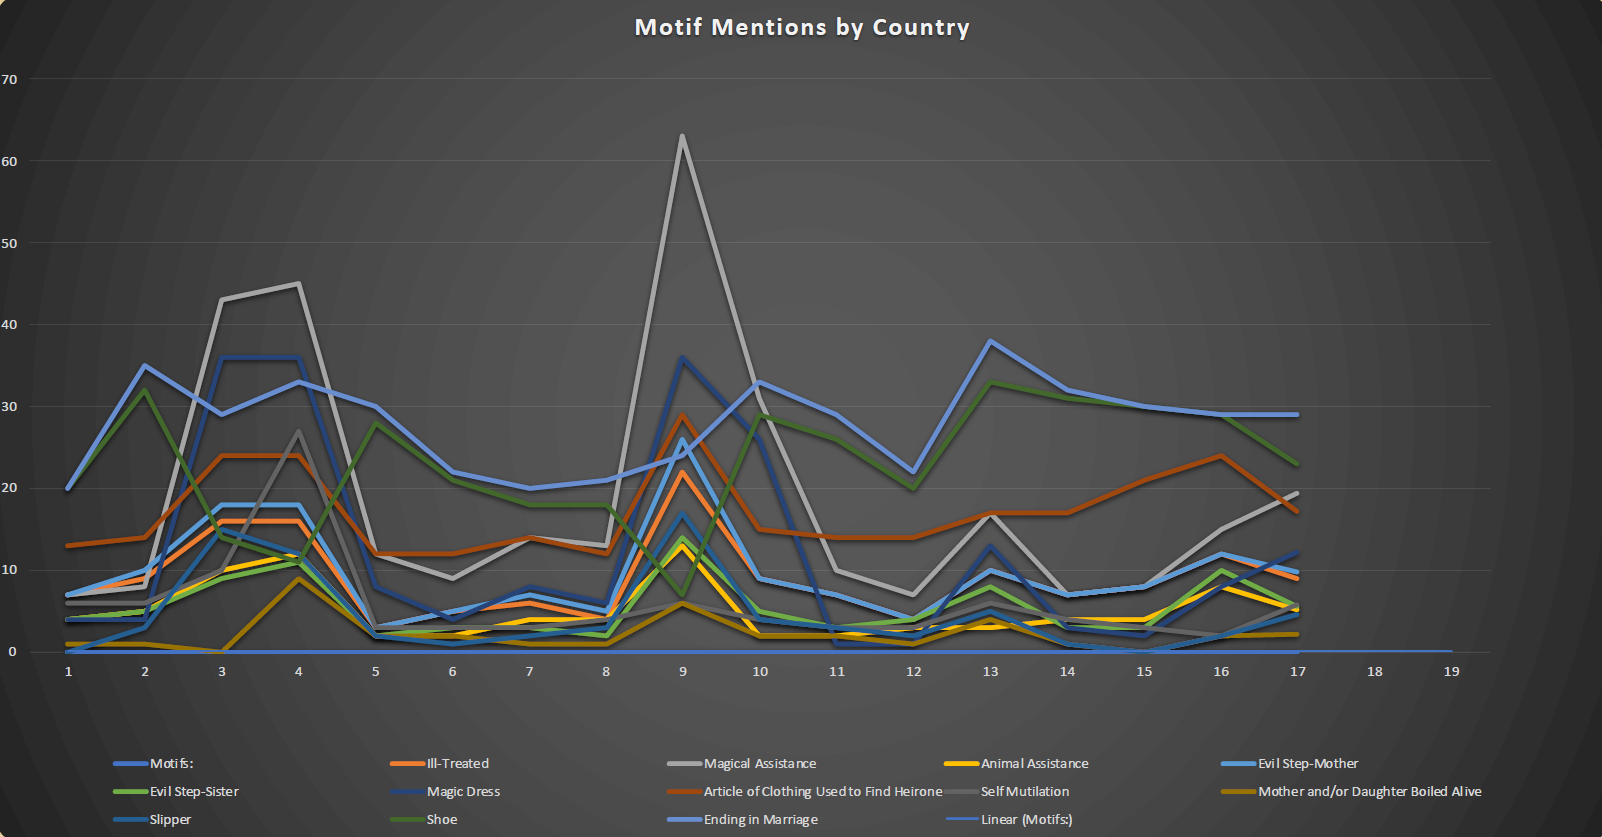 A graph showing motif mentions (such as evil step-sister, slippers, magic dress, ending in marriage)by country